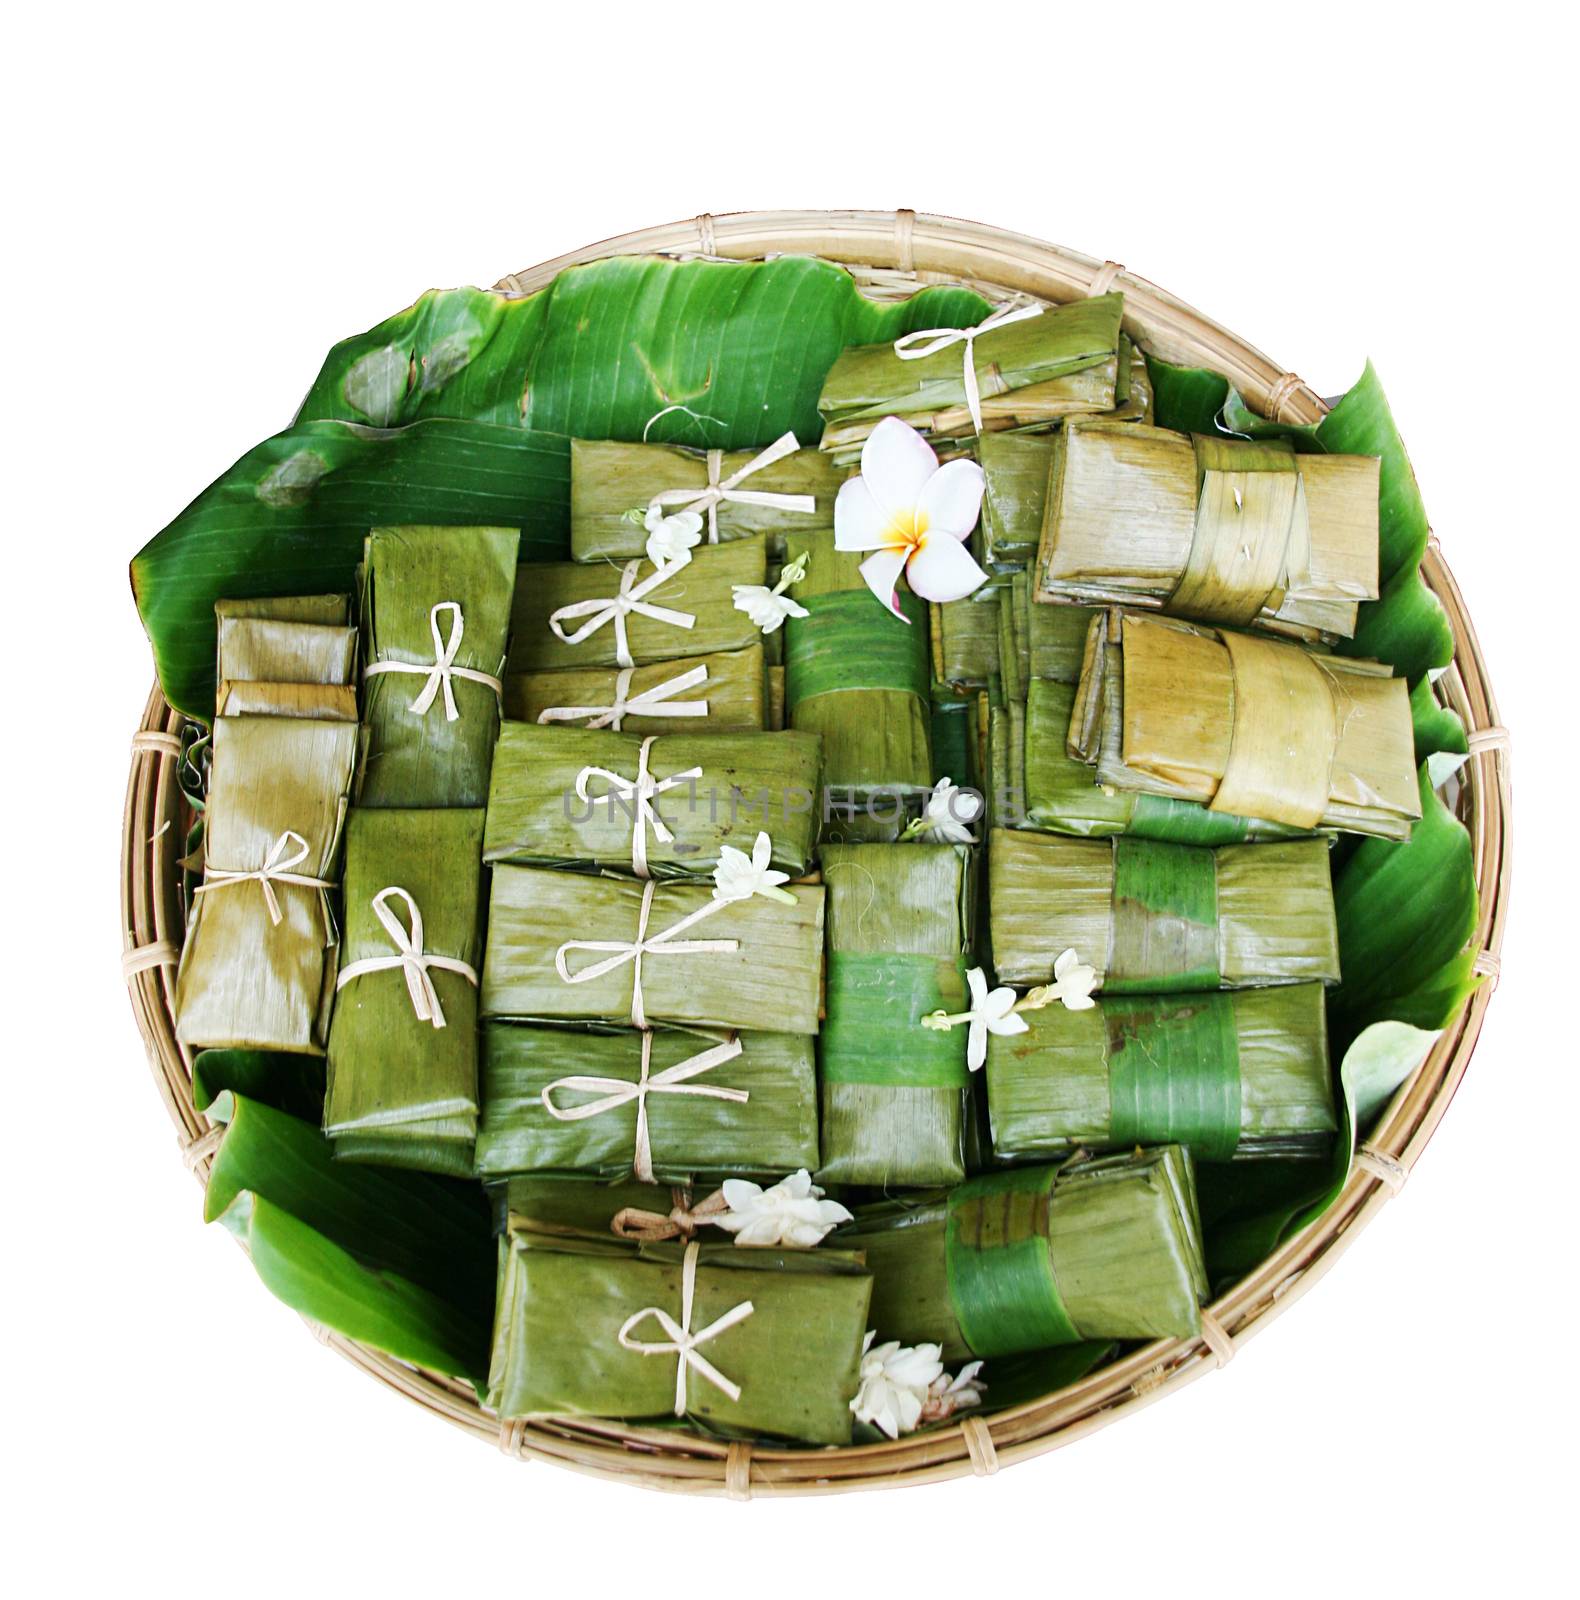 Thai dessert like a rice soup with bound,Bananas with Sticky Rice,steamed rice dough with sweet stuffing,Steamed toddy palm cake stuffed dumping are wrapping with banana leaf and decorate in basket.